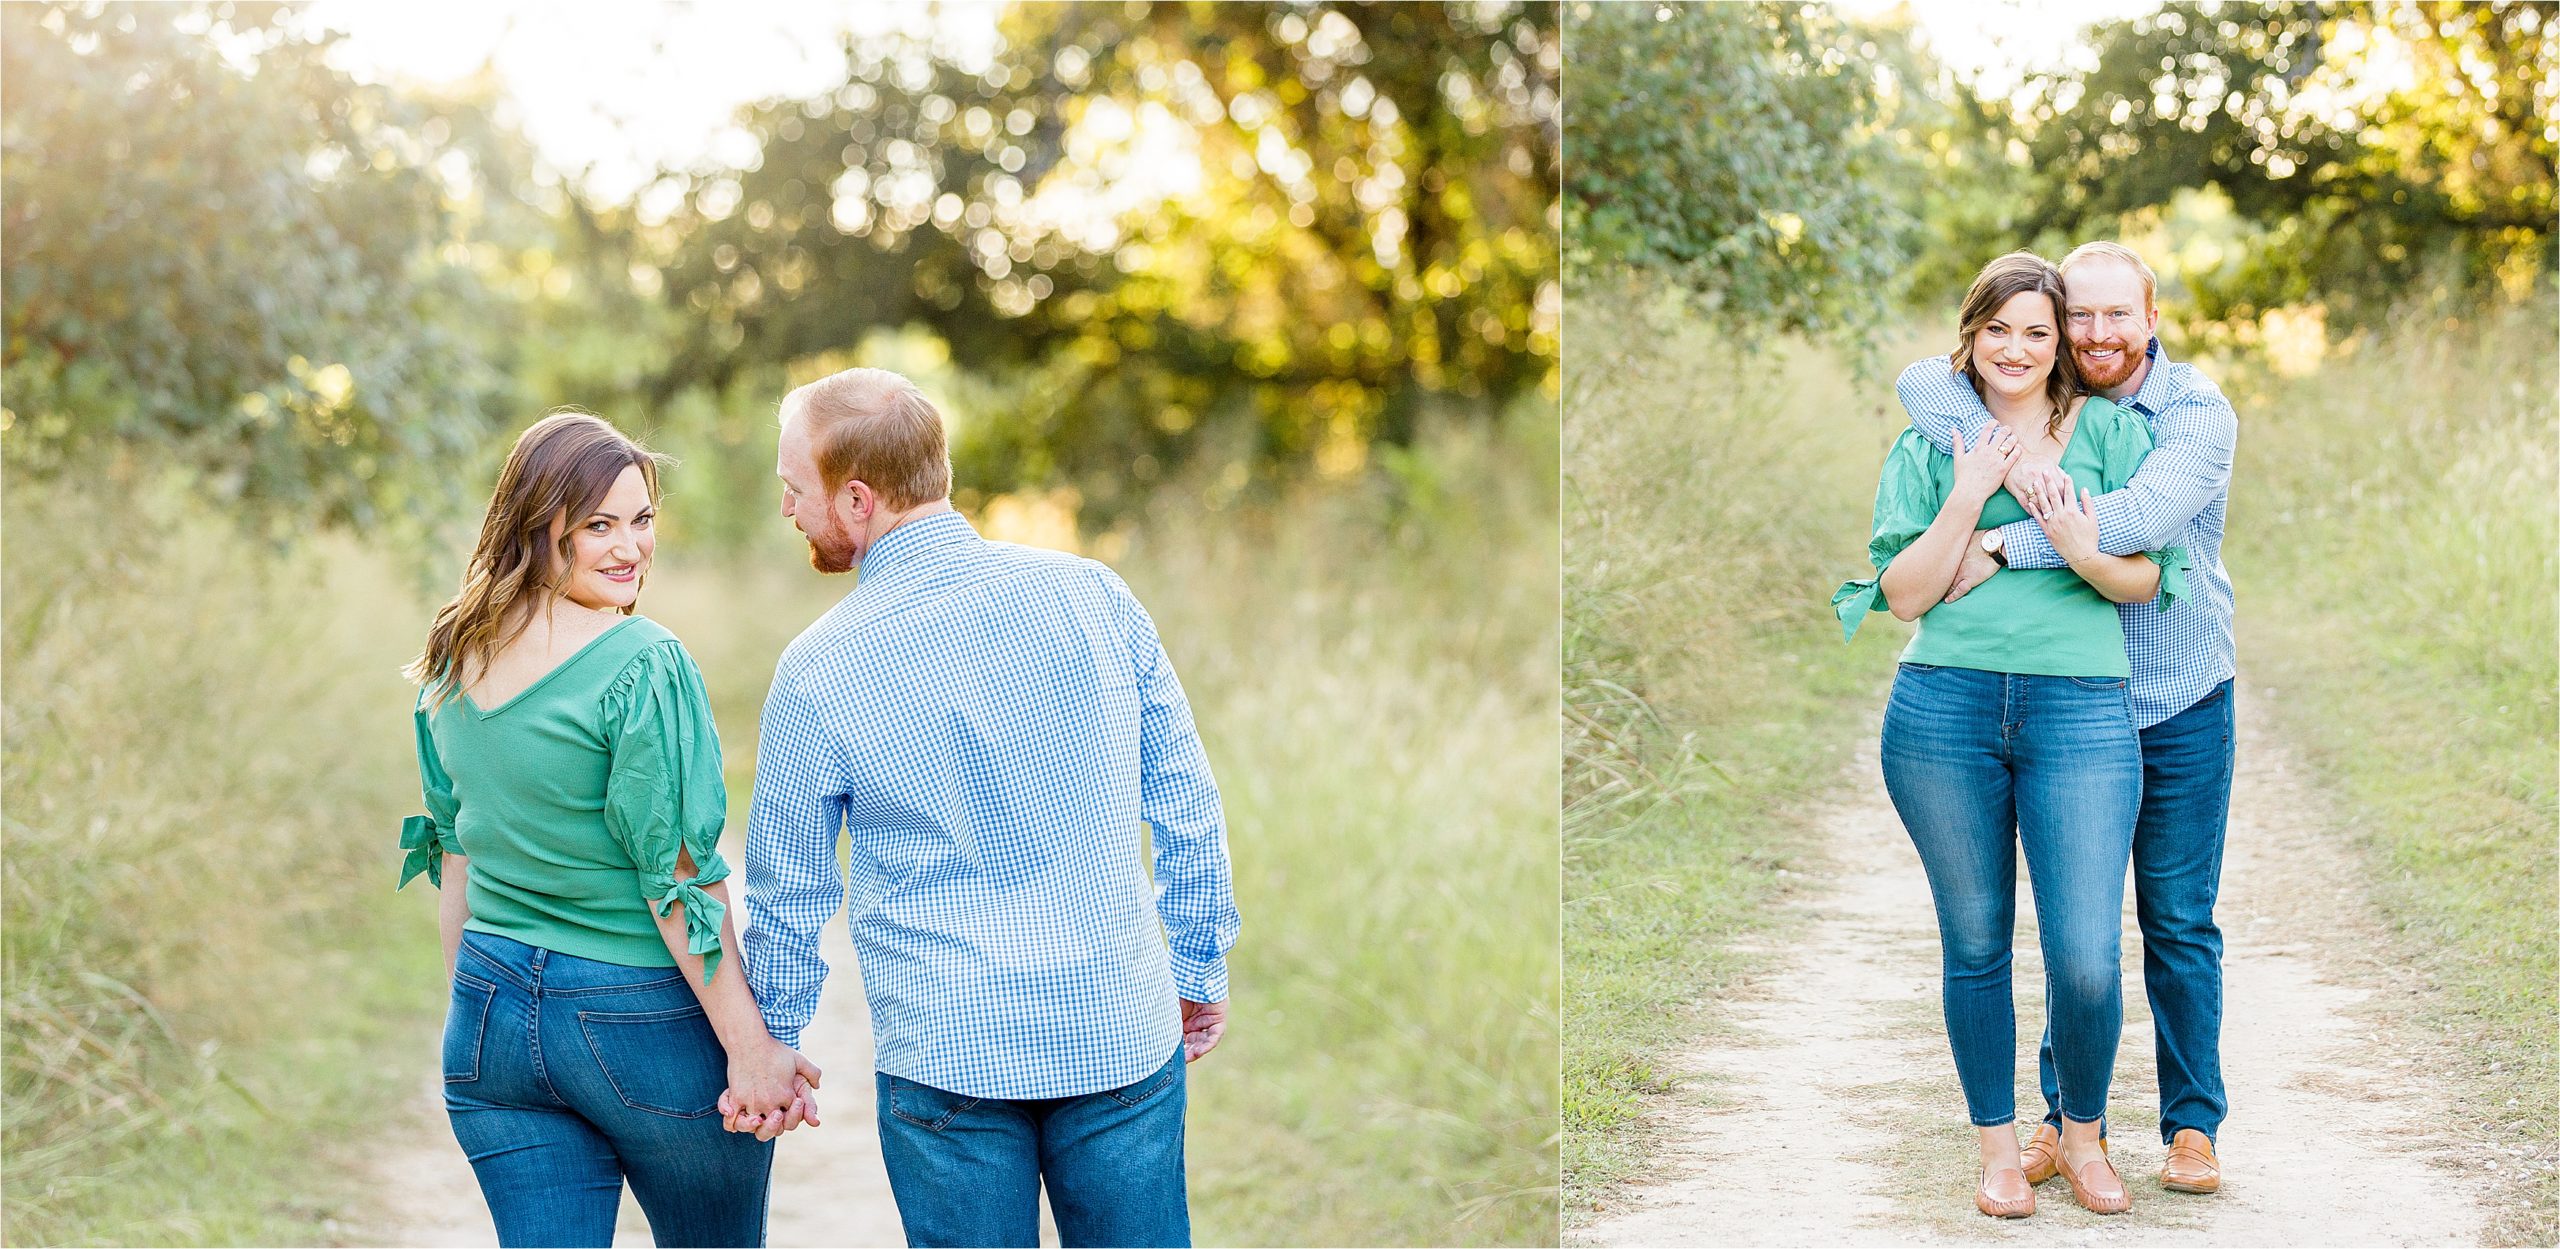 A couple hugs and a bride to be looks back smiling at the camera during their outdoor sunshine-filled engagement session in Boerne, TX with Hill Country Wedding Photographer Jillian Hogan 